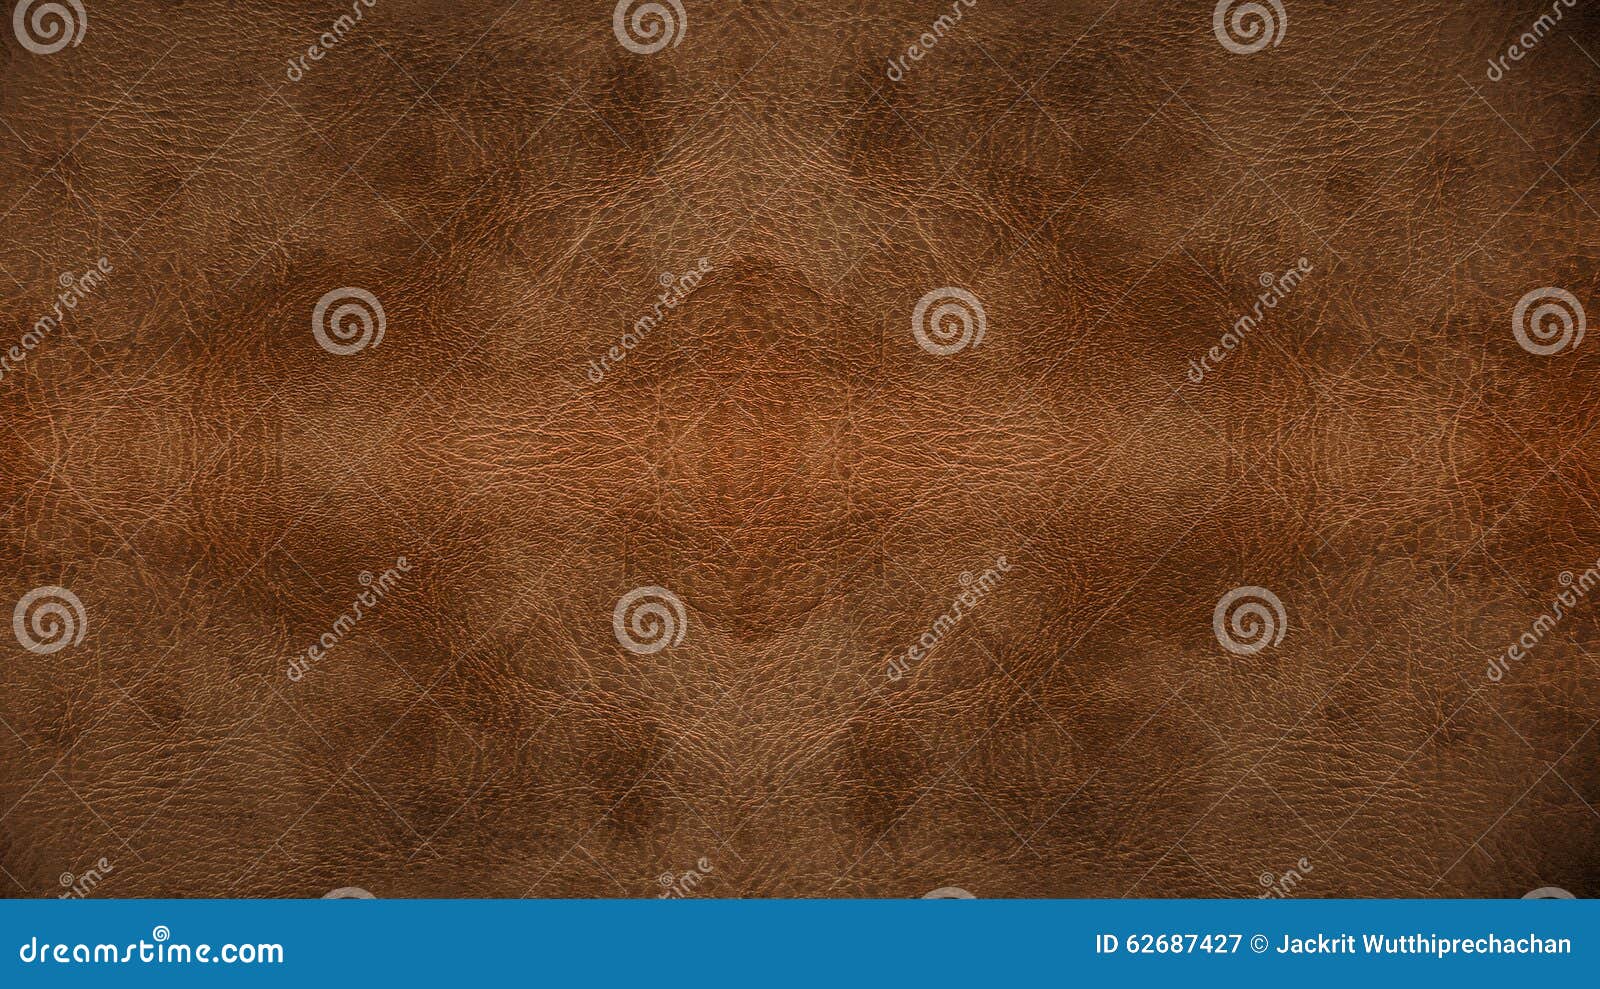 used light brown leather seamless pattern background texture for furniture material